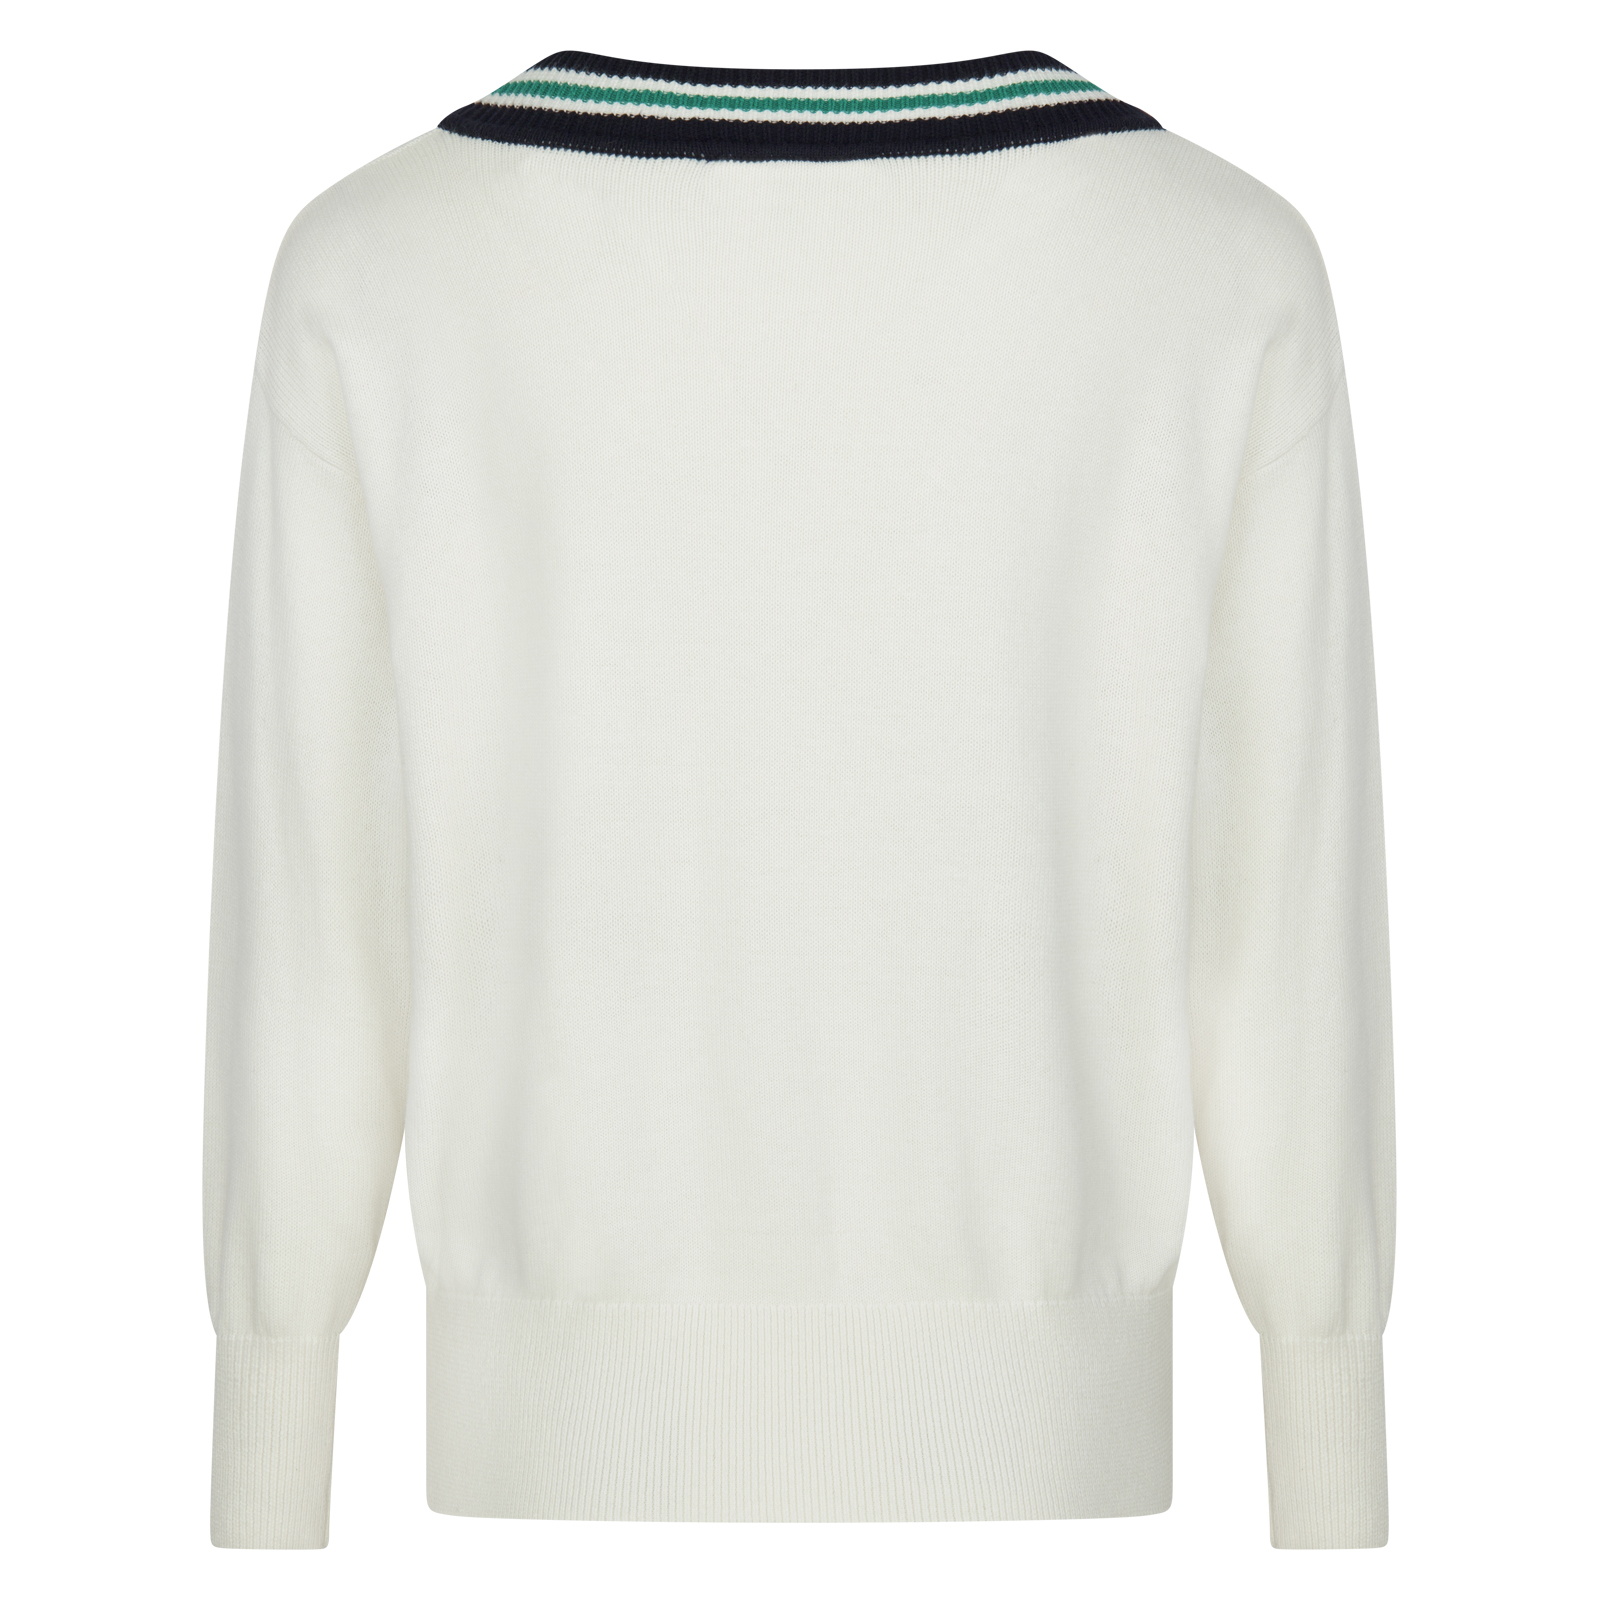 Ladies' sustainable V-neck golf sweater with cashmere